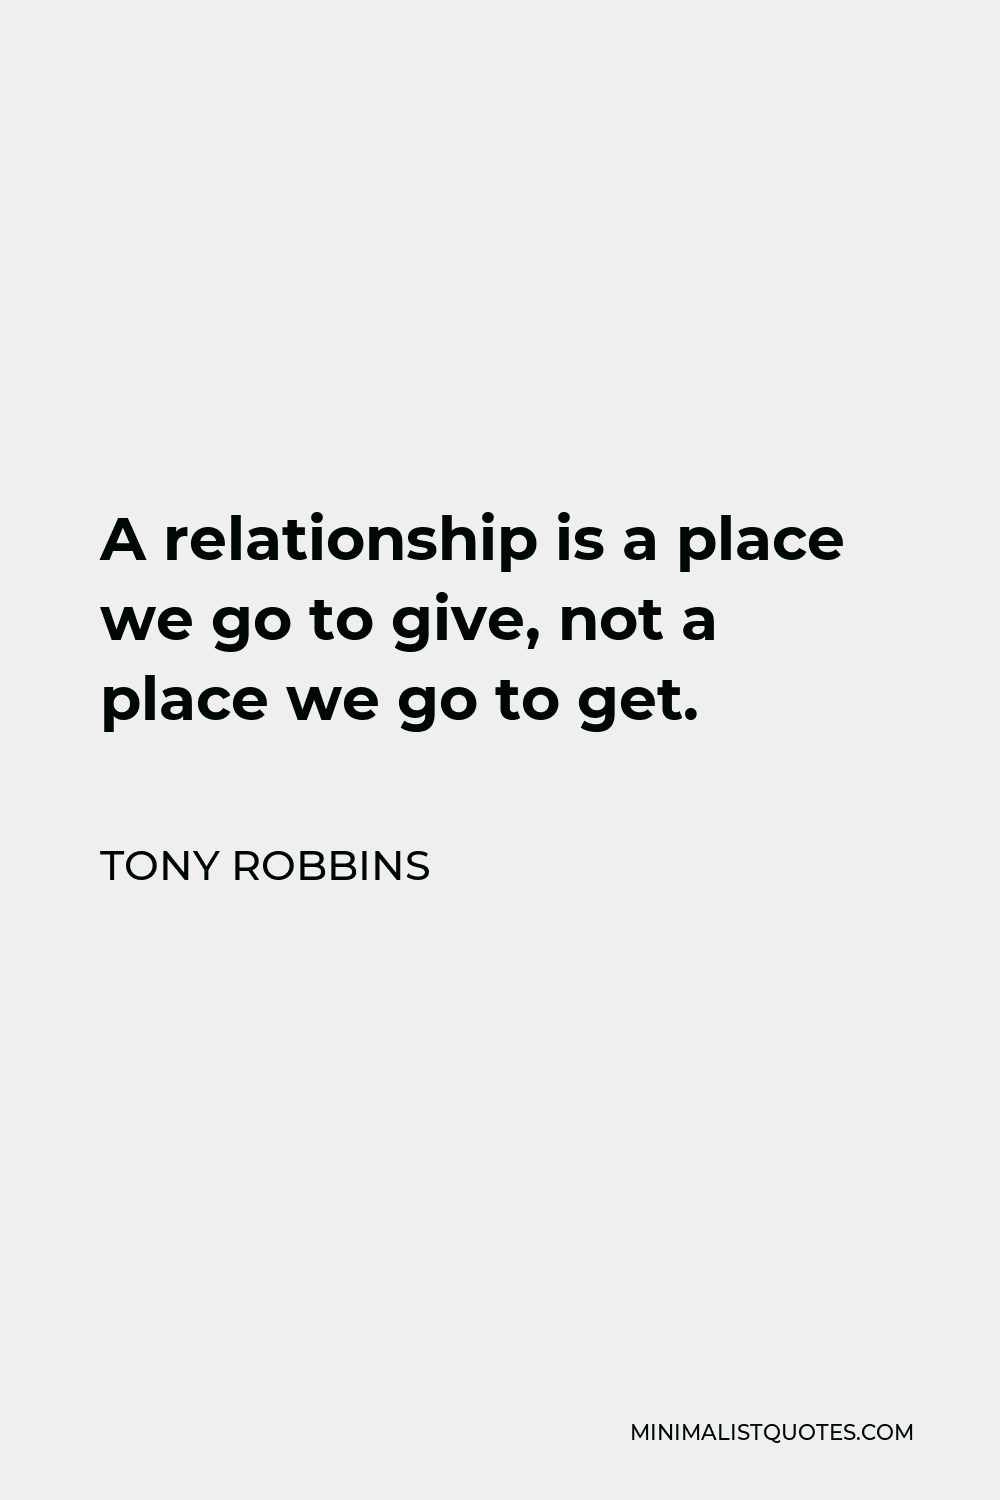 Tony Robbins Quote - A relationship is a place we go to give, not a place we go to get.